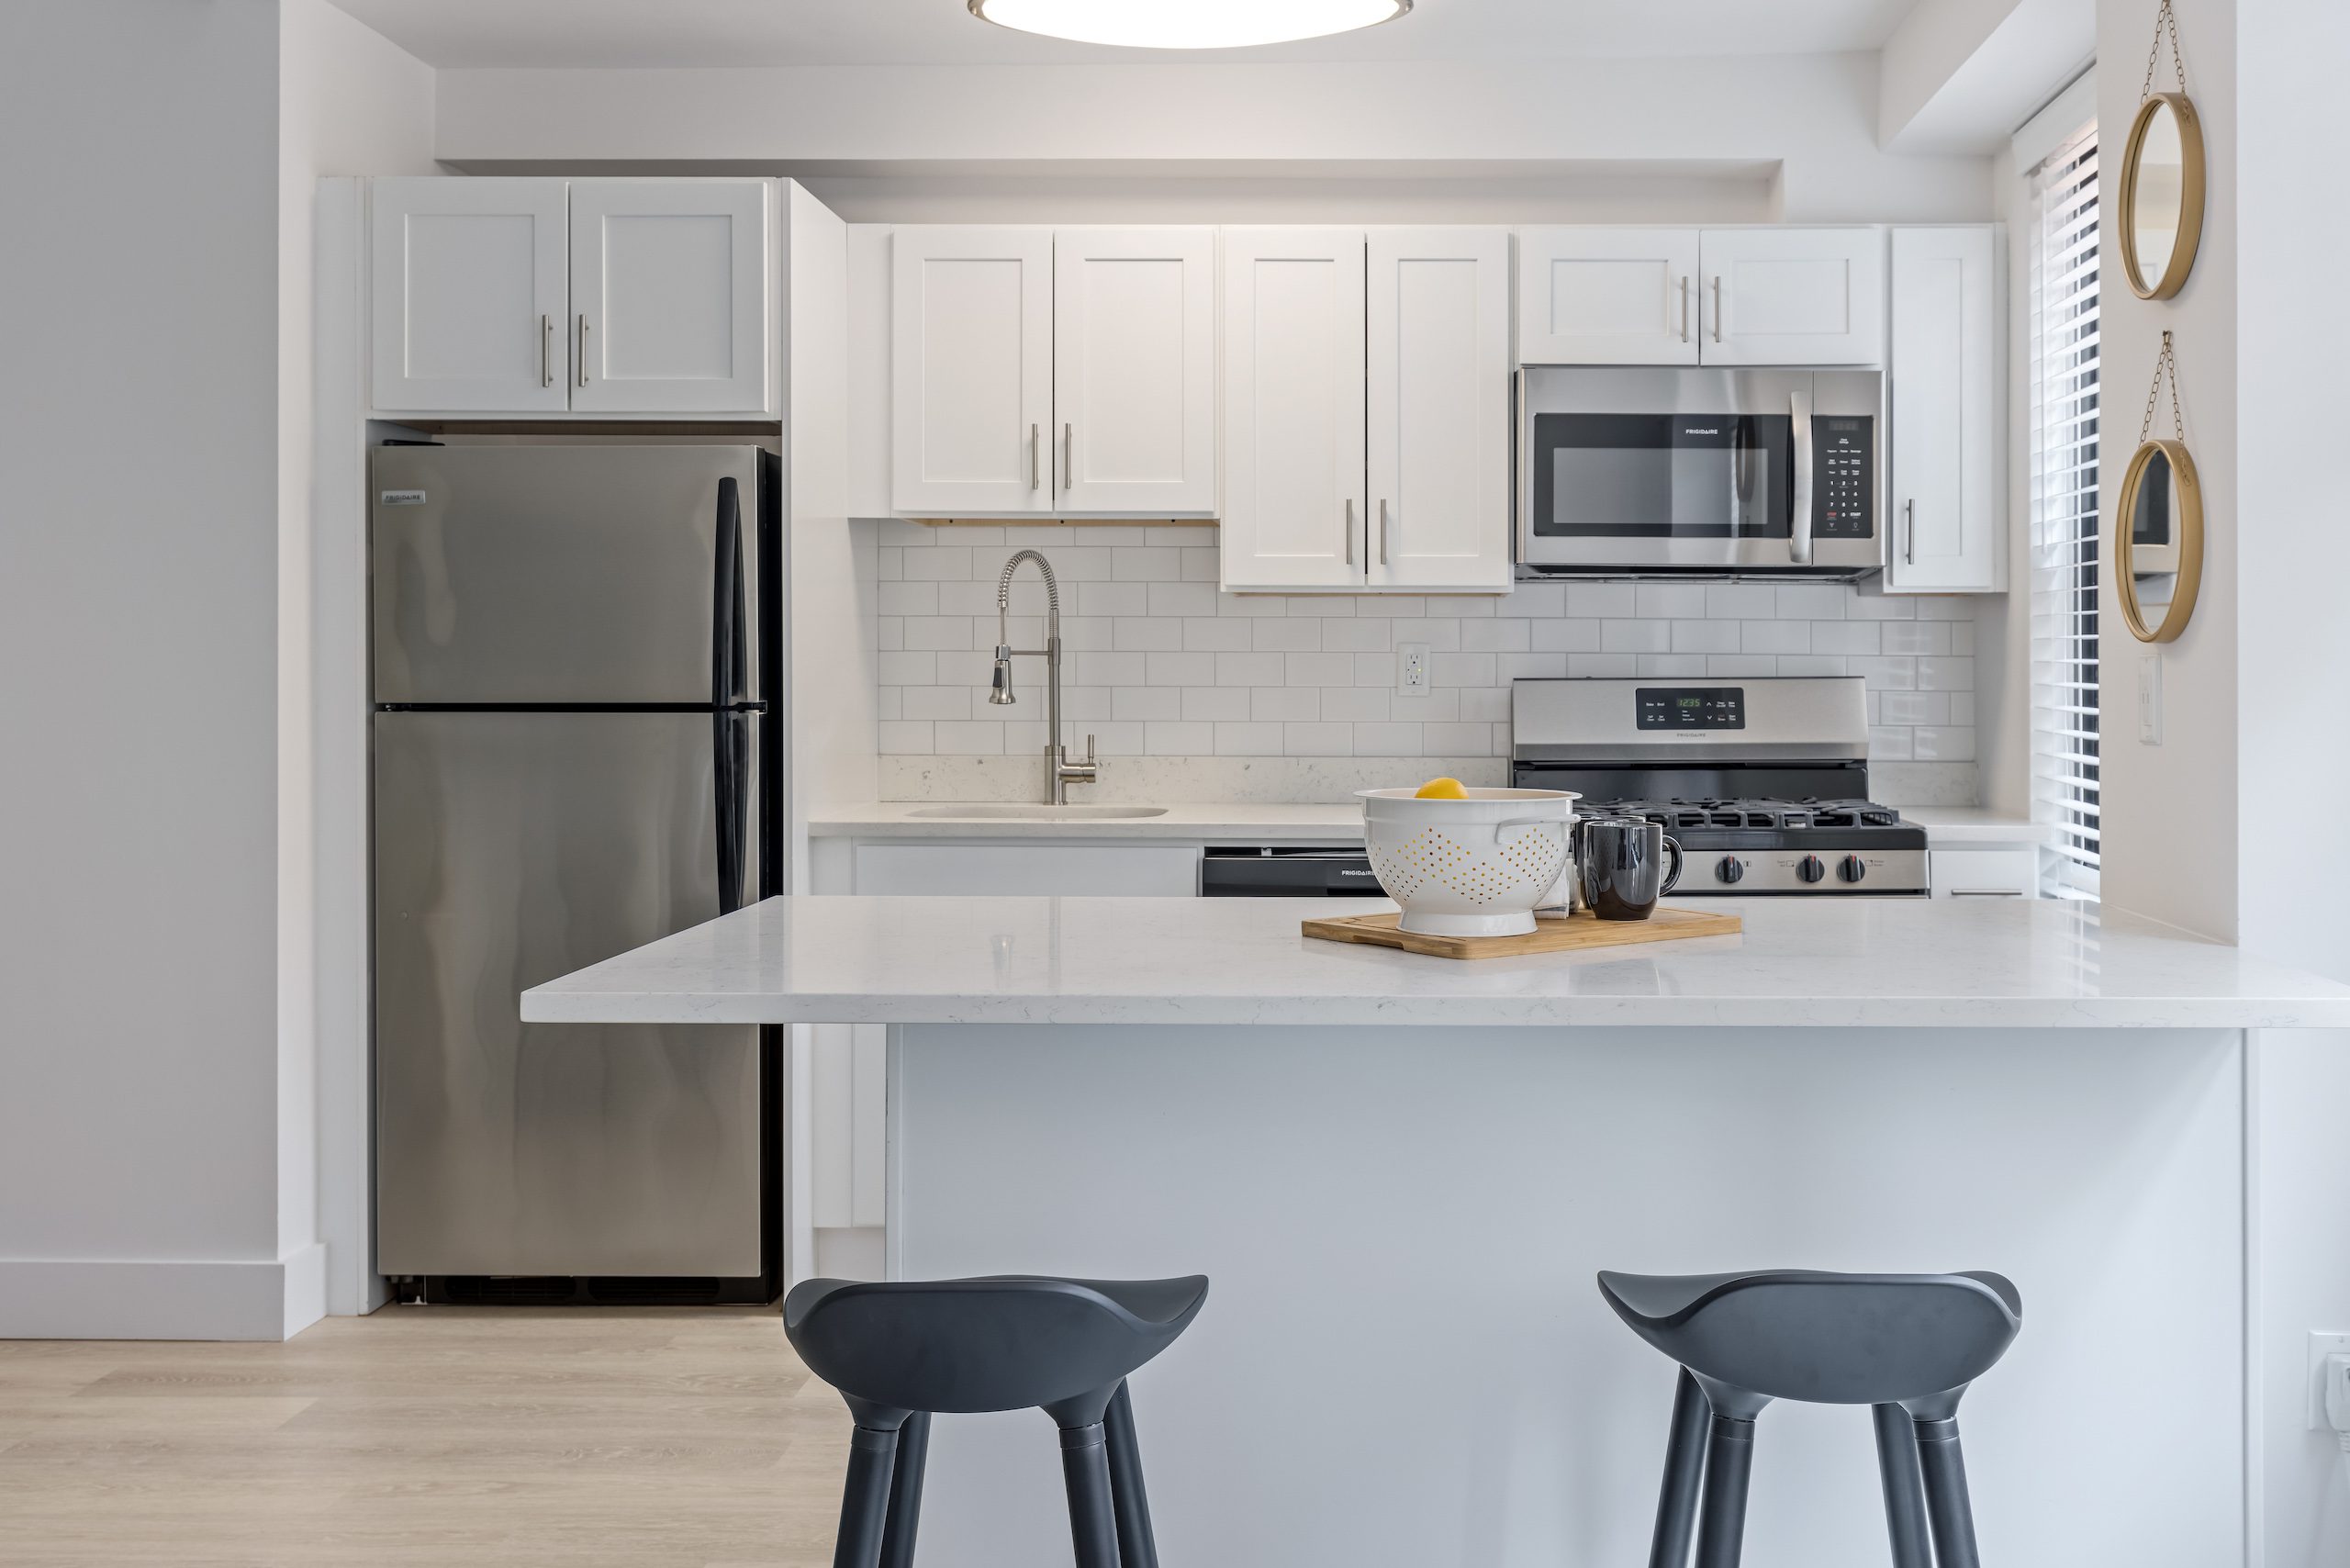 203 Living - rental apartment kitchen with stainless steel appliances at Prospect Park in Stamford